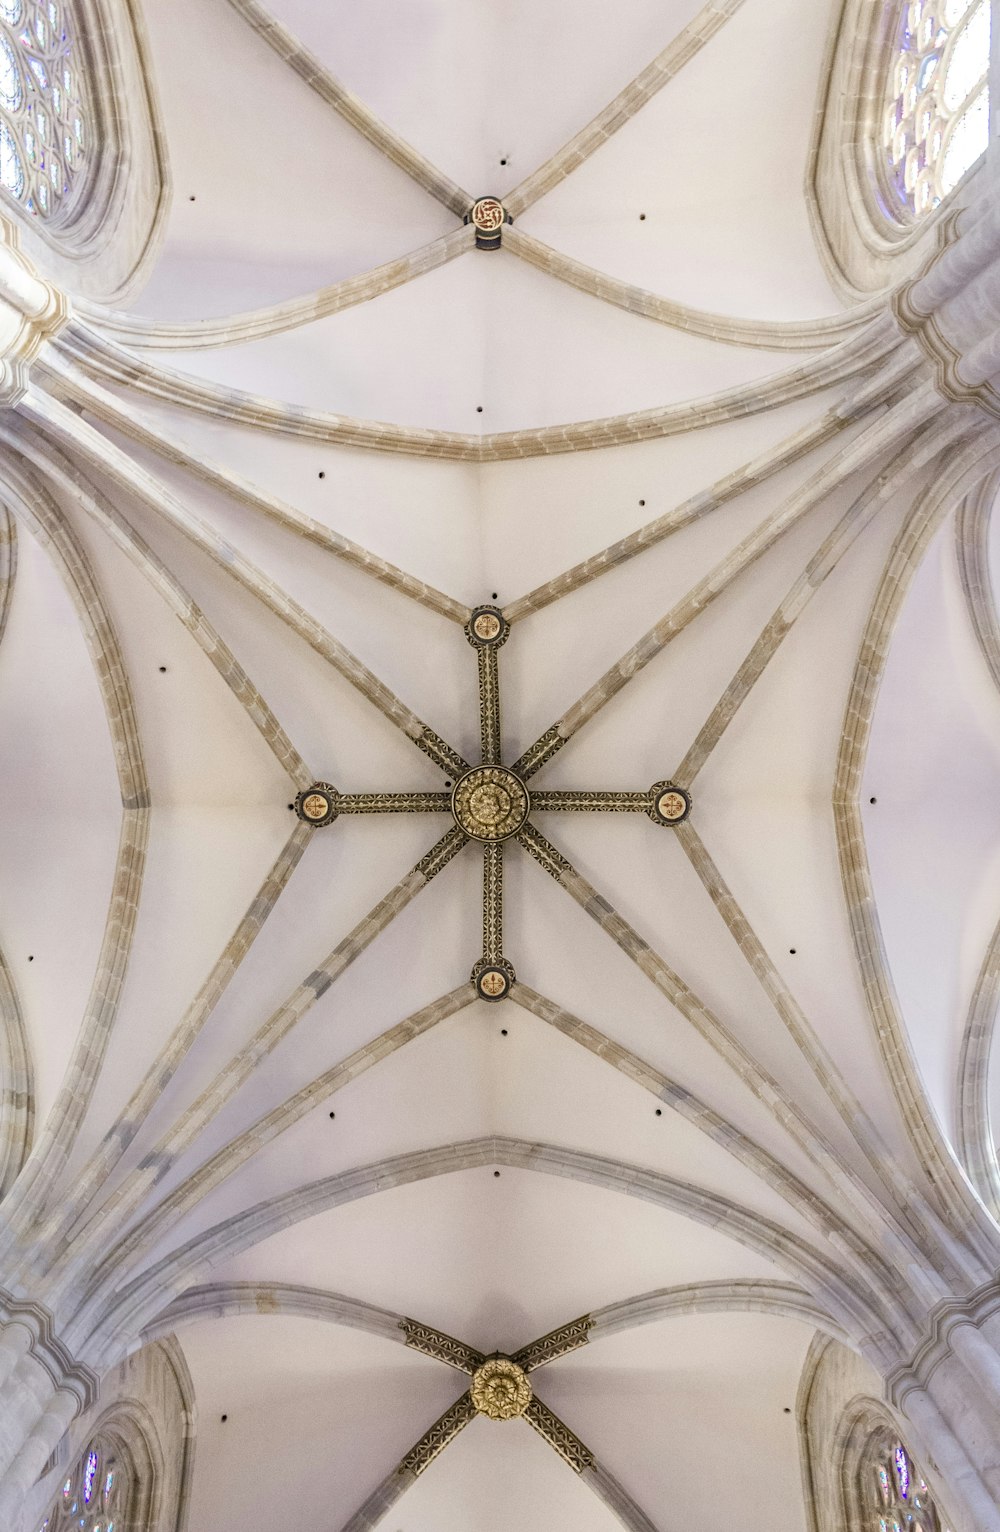 the ceiling of a cathedral with a cross in the middle